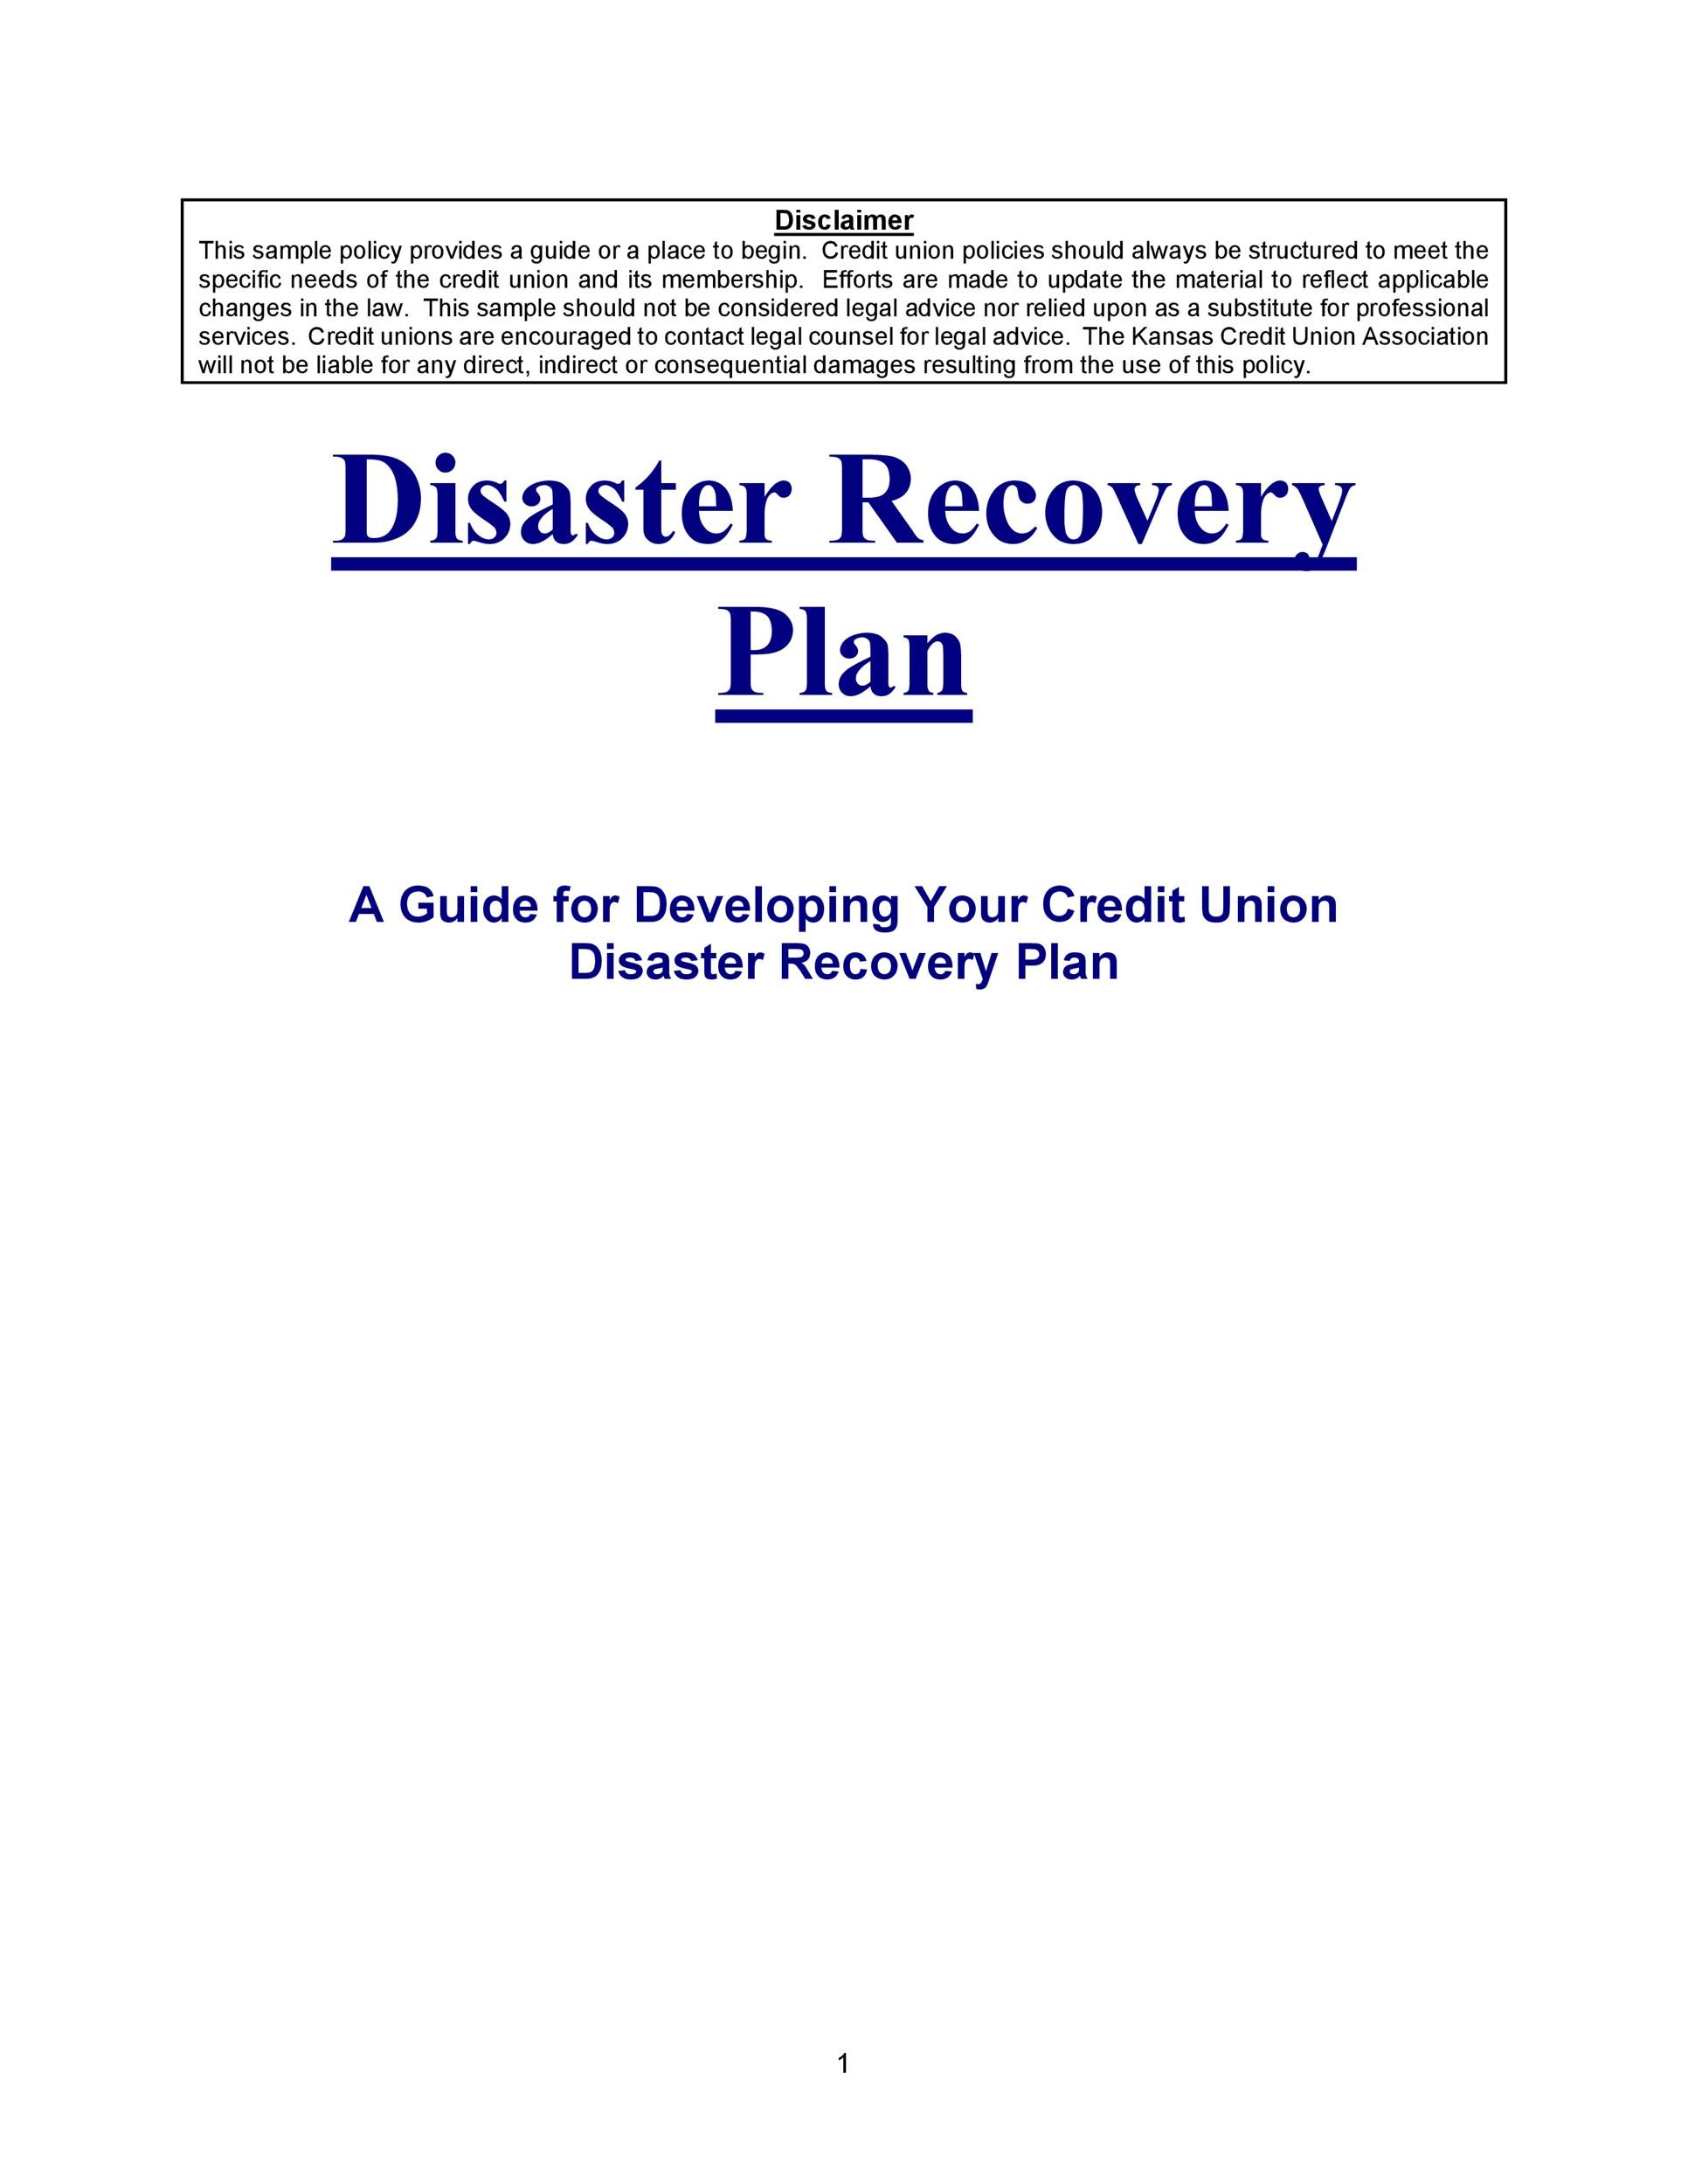 52 Effective Disaster Recovery Plan Templates DRP ᐅ TemplateLab